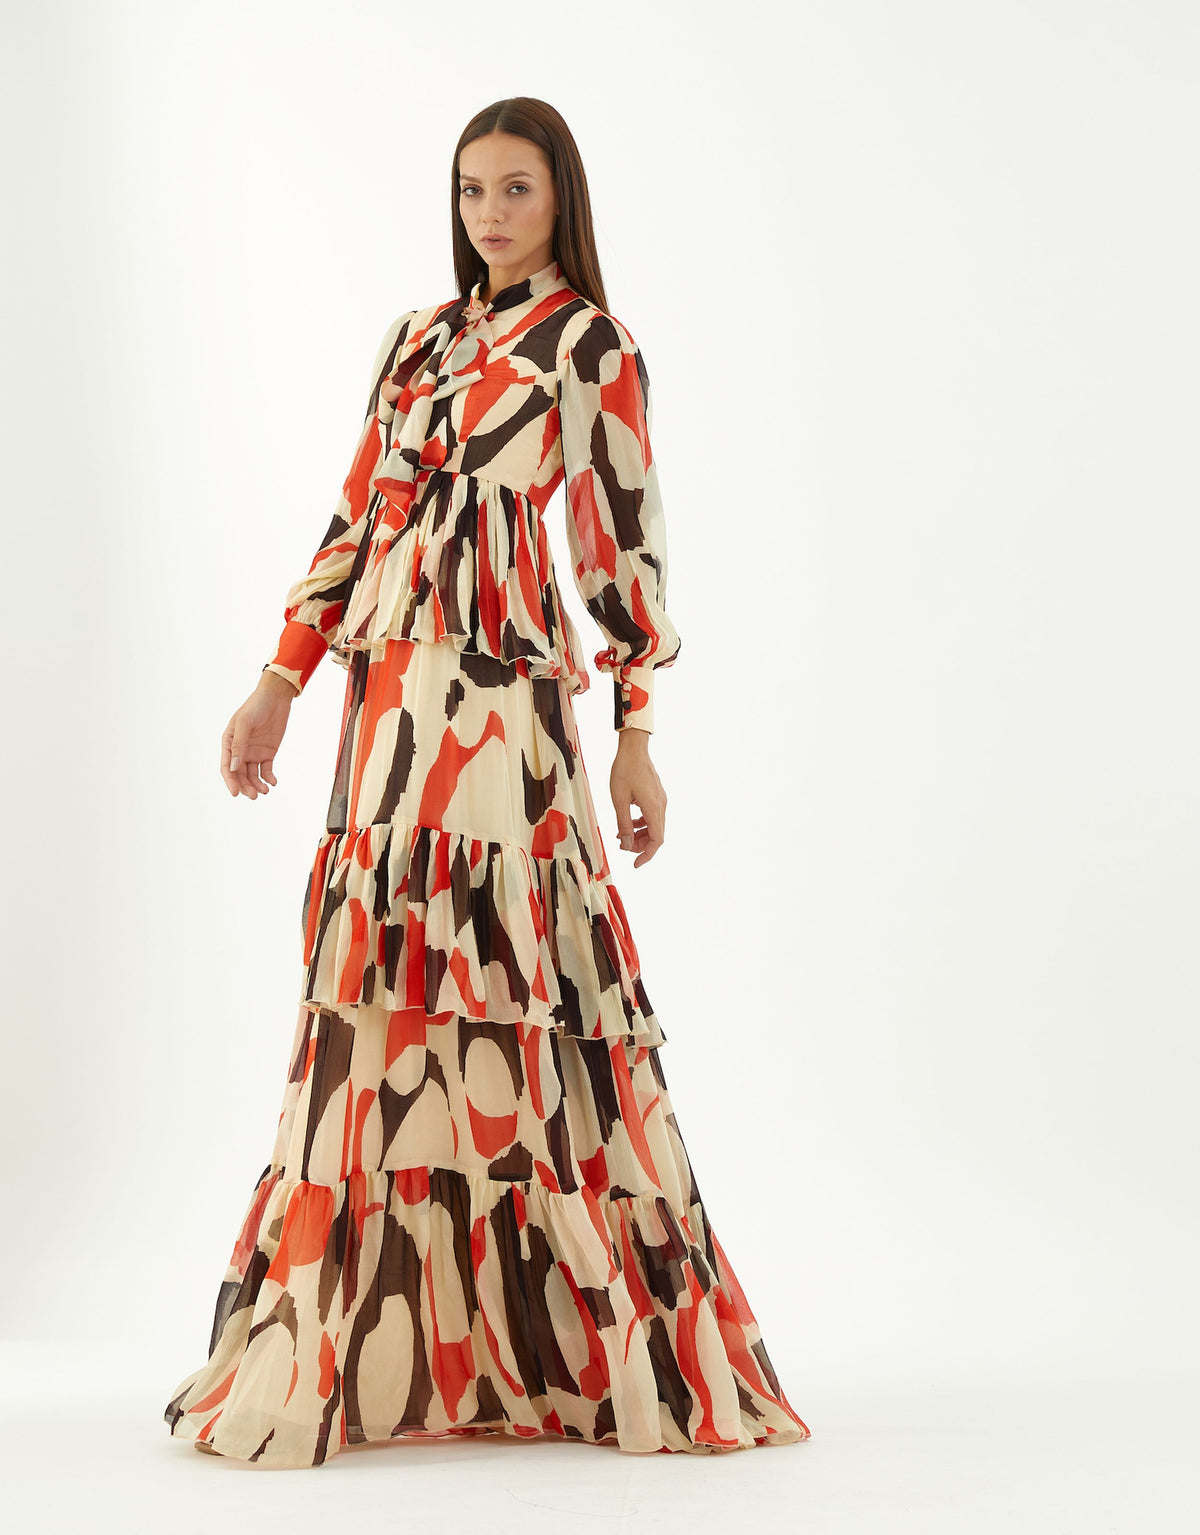 OFFWHITE, RED AND BLACK ABSTRACT FRILL DRESS